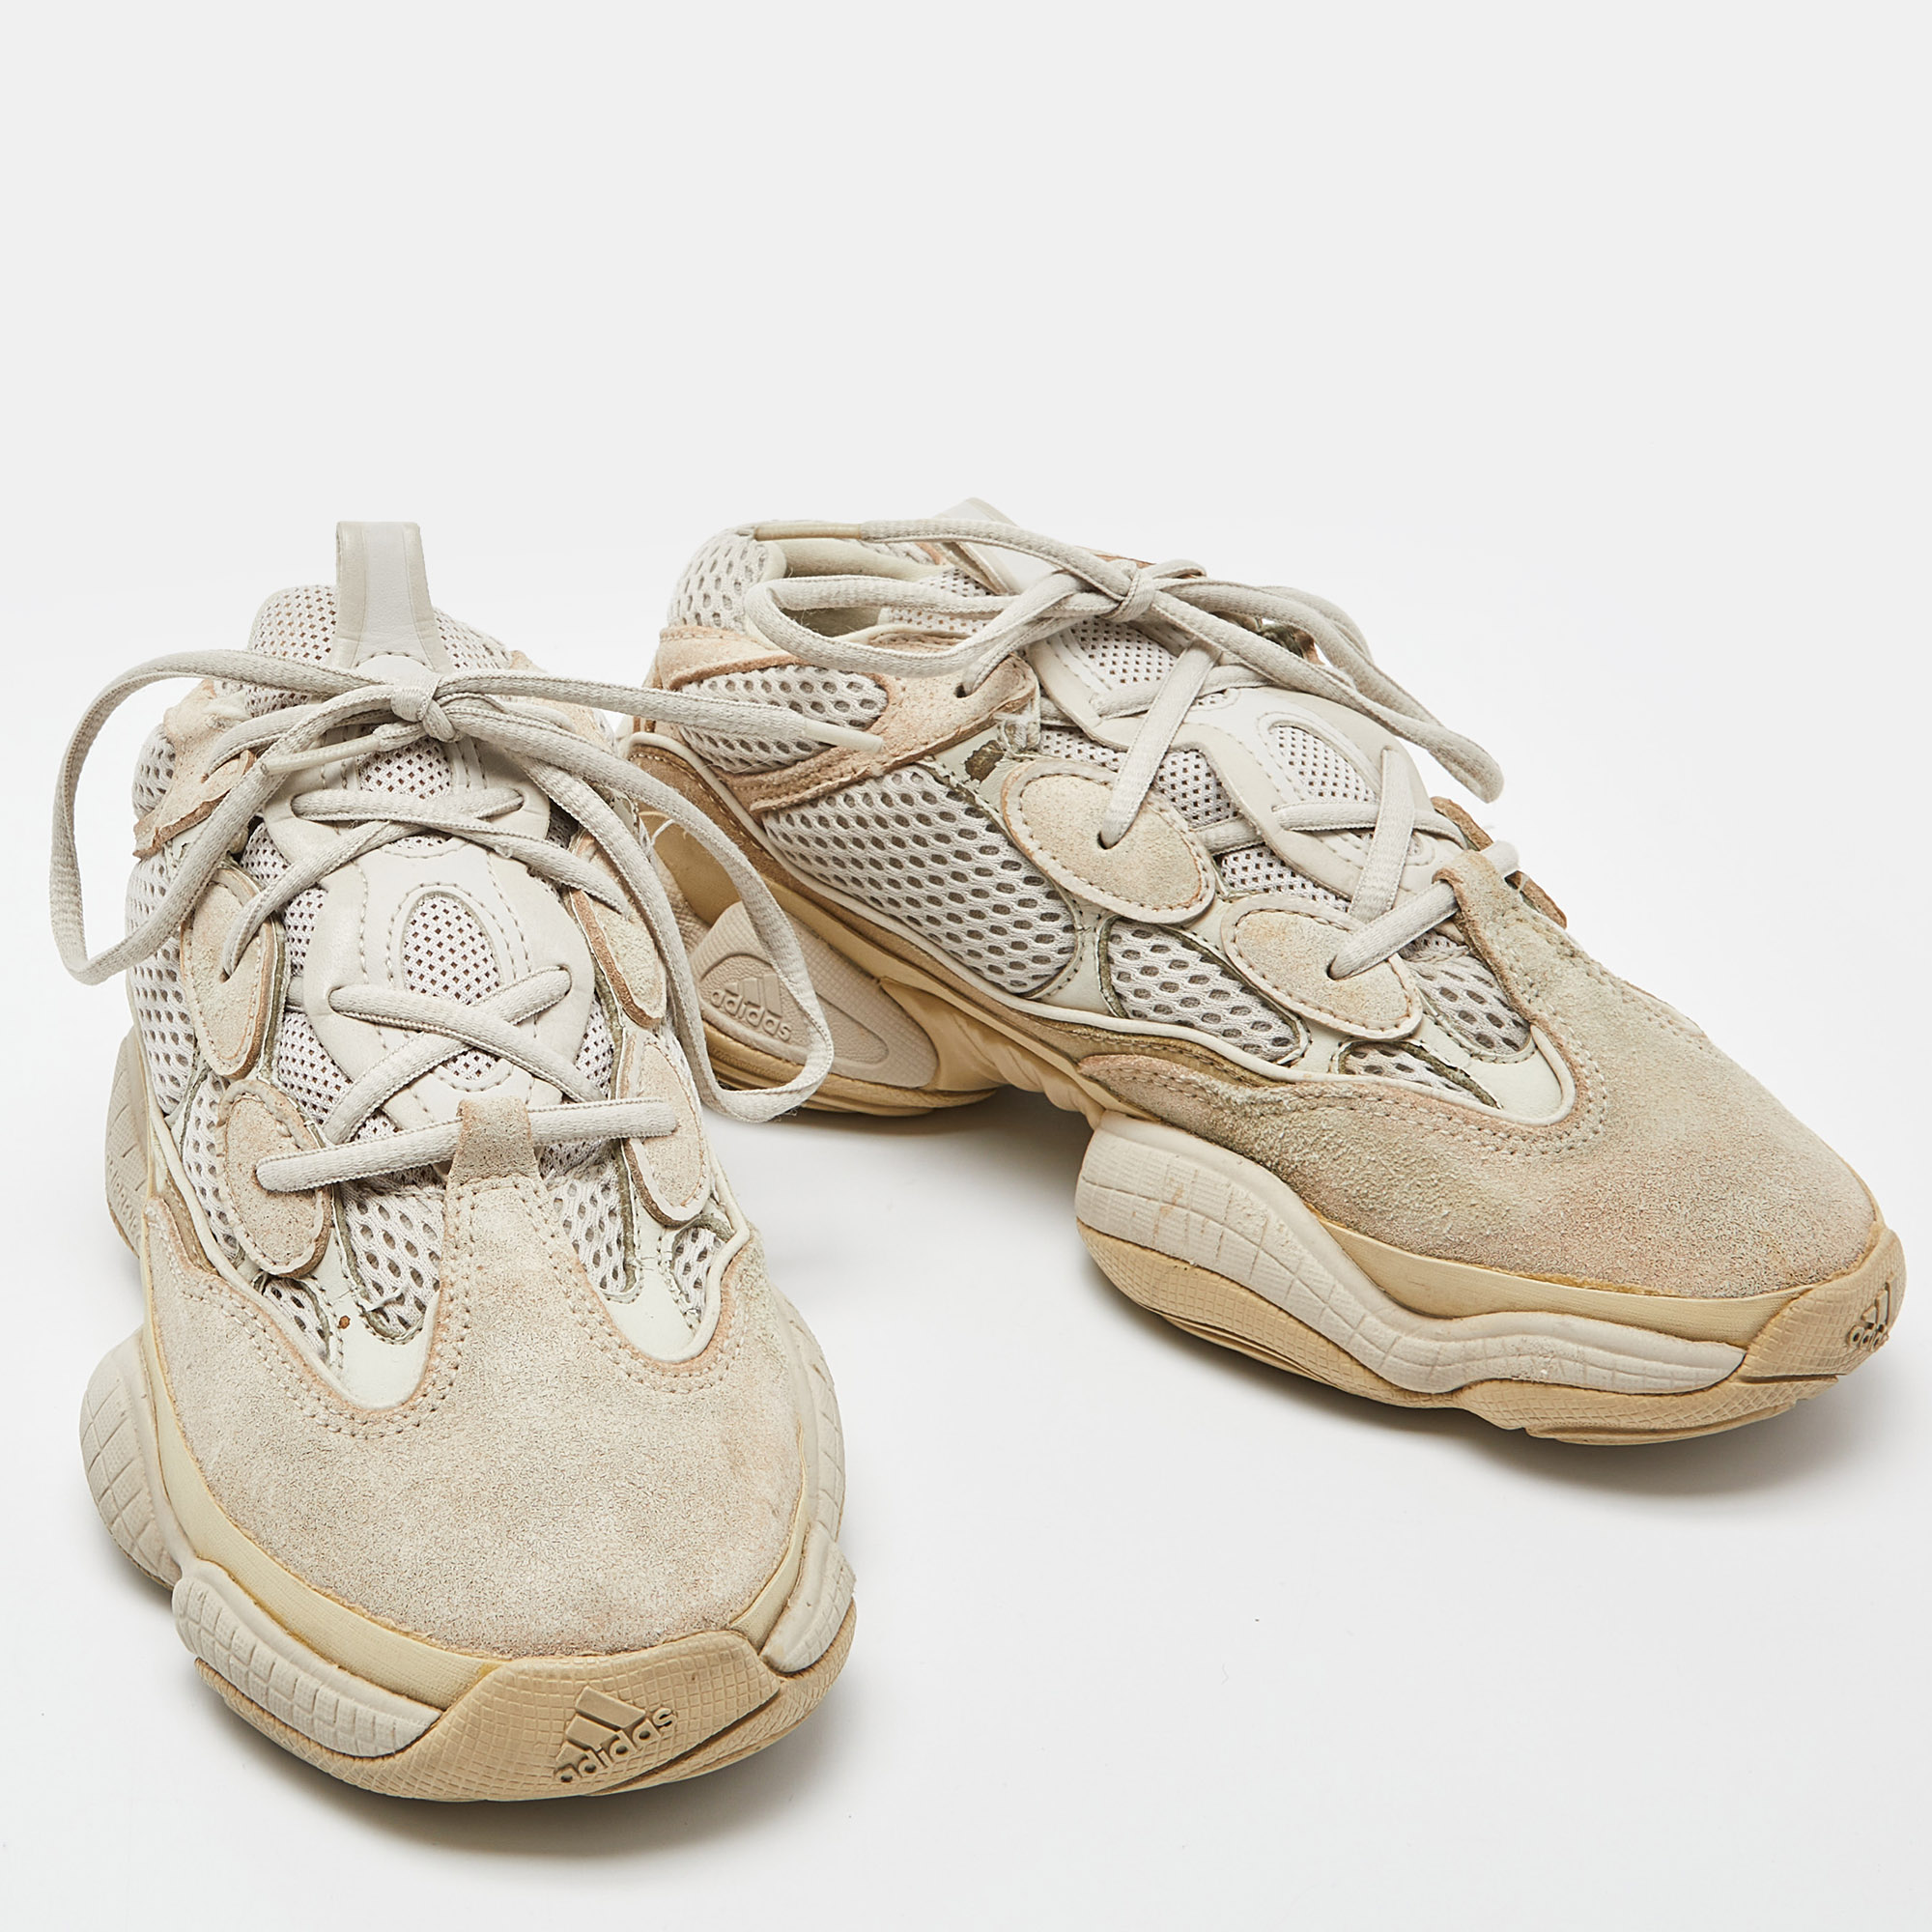 Yeezy X Adidas Cream Suede And Mesh Yeezy 500 Blush Sneakers Size 38 2/3